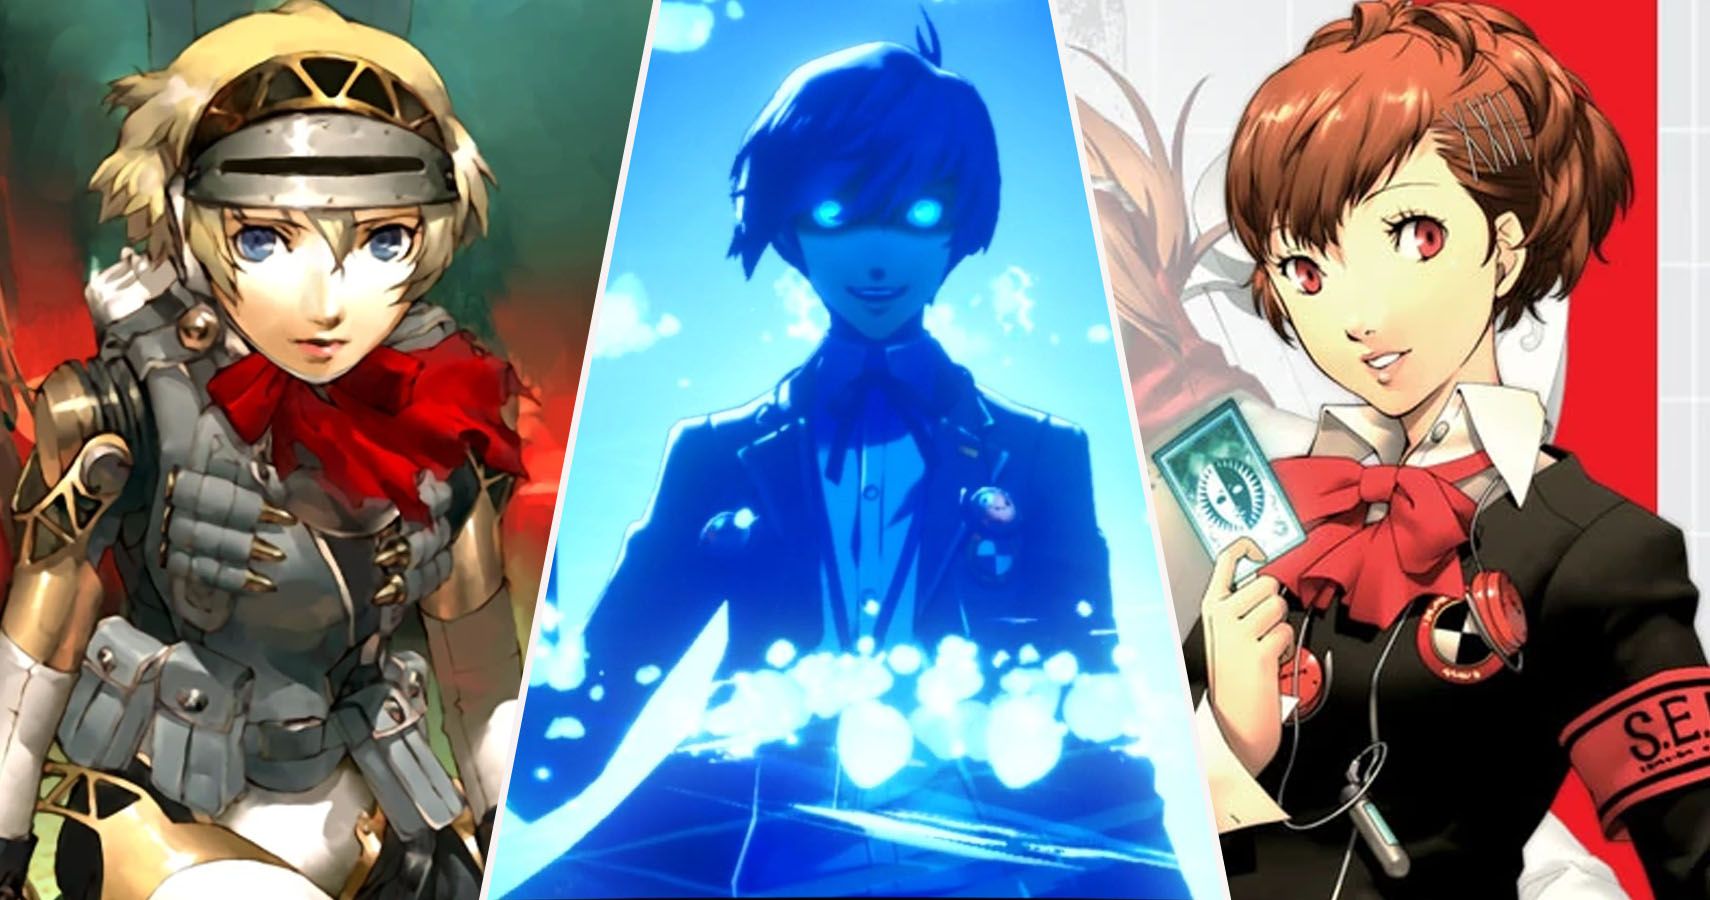 Split image of Aigis from Persona 3 FES, Protagonist from Persona 3 Reload, and FemC from P3Portable